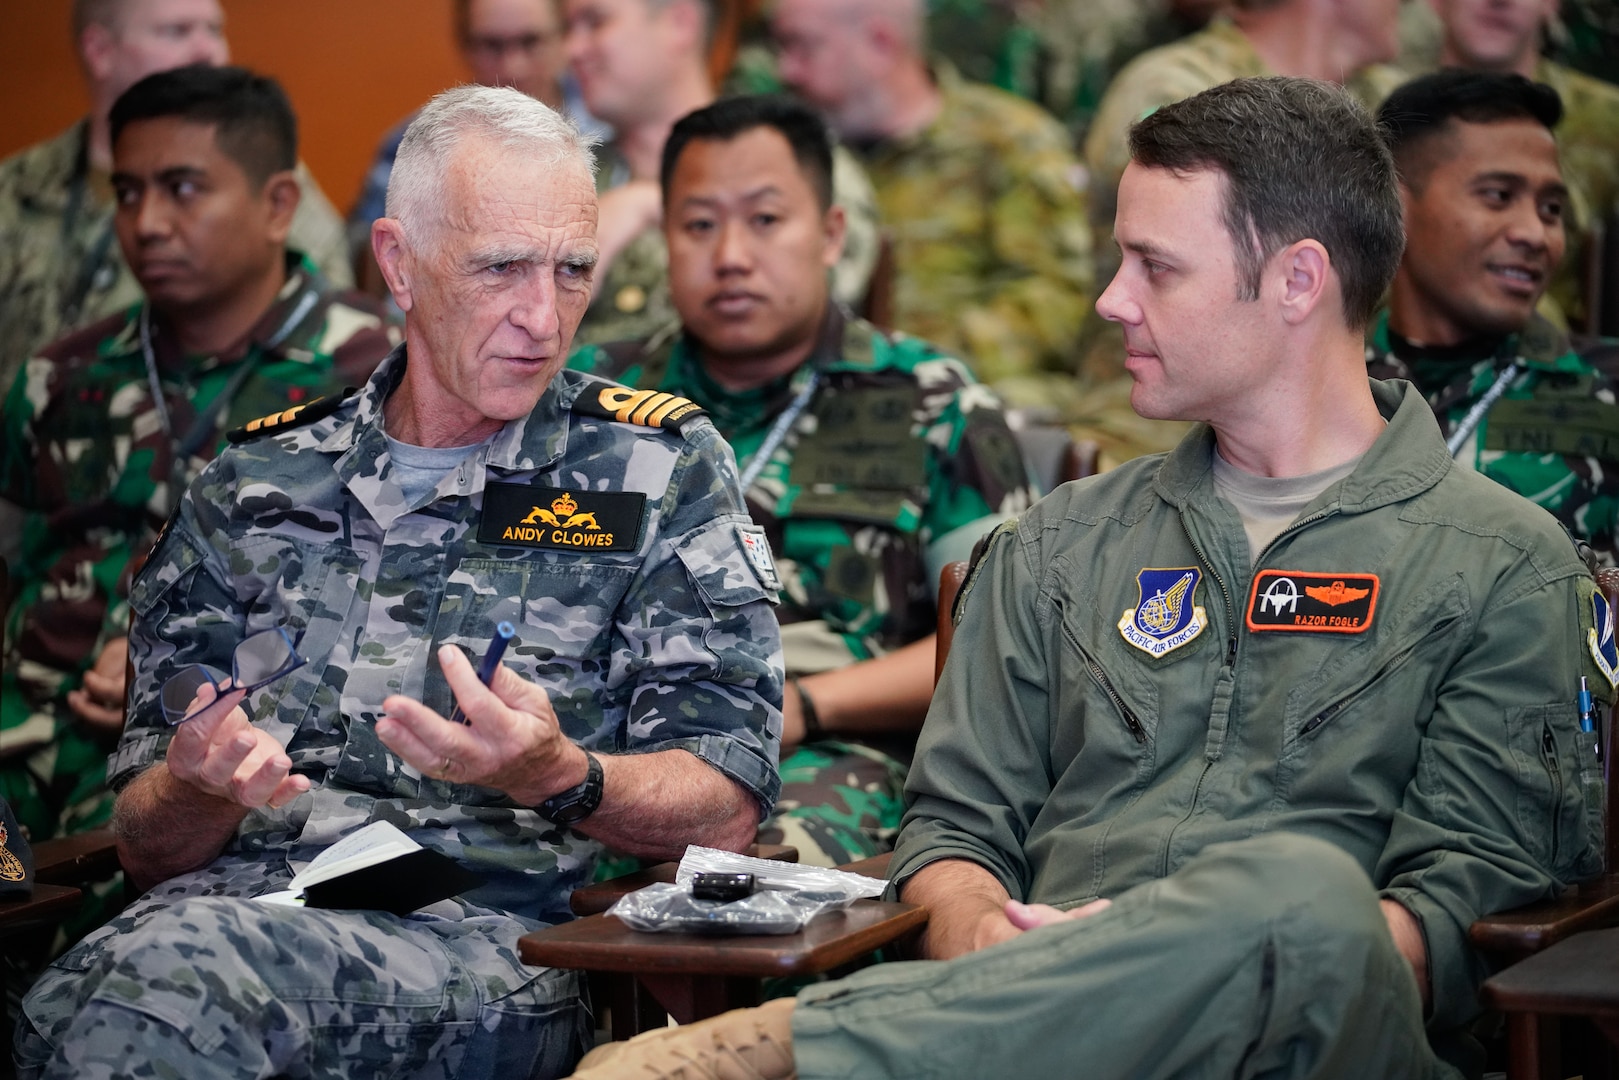 Capt. John Rauch, U.S. Marines, and Maj. Kriyanto, Tentara Nasional Indonesia (TNI) discuss what they expect from the staff exercise portion of Super Garuda Shield 2023 (SGS23) August 31, 2023, Surabaya Indonesia. #SuperGarudaShield 2023 is an annual exercise that has significantly grown in scope and size since 2009. #SGS2023 is the second consecutive time this exercise has grown into a combined and #joint event, highlighting the 6 participating and 12 observing nations’ commitment to #partnership and a #freeandopenindopacific. (US Air National Guard Photo by Air Force Master Sgt. Andrew Lee Jackson)